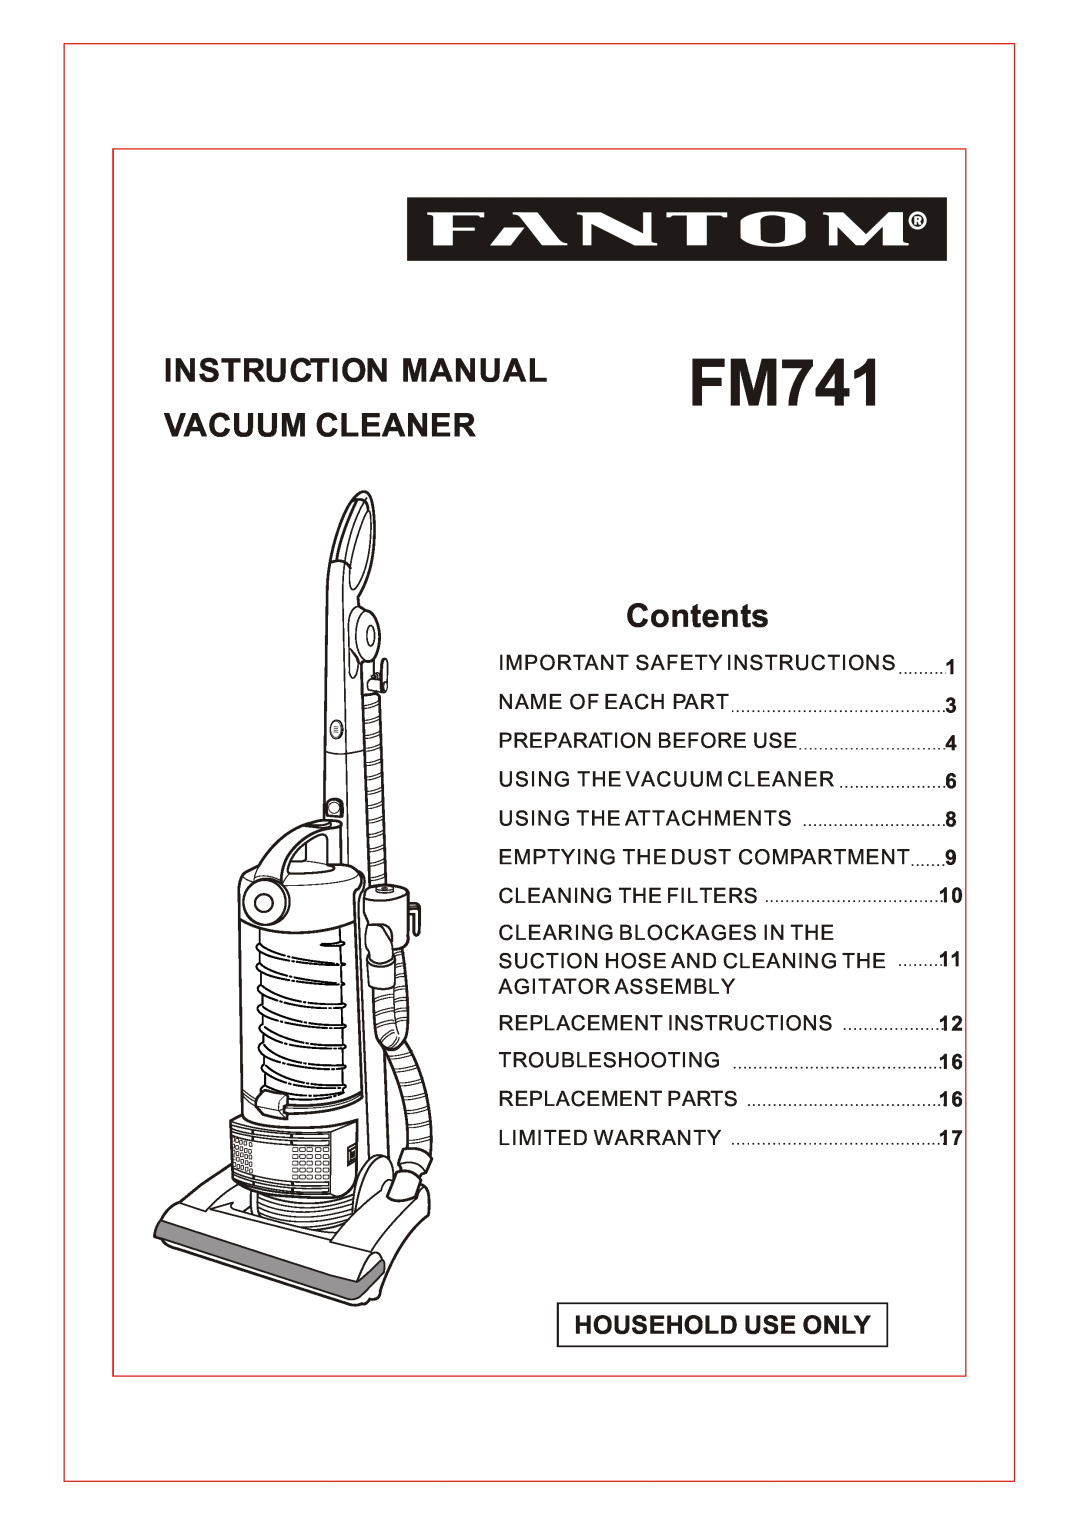 Fantom Vacuum FM741 instruction manual Vacuum Cleaner, Contents, Household Use Only, 1 3 4 6 8 9 10 11 